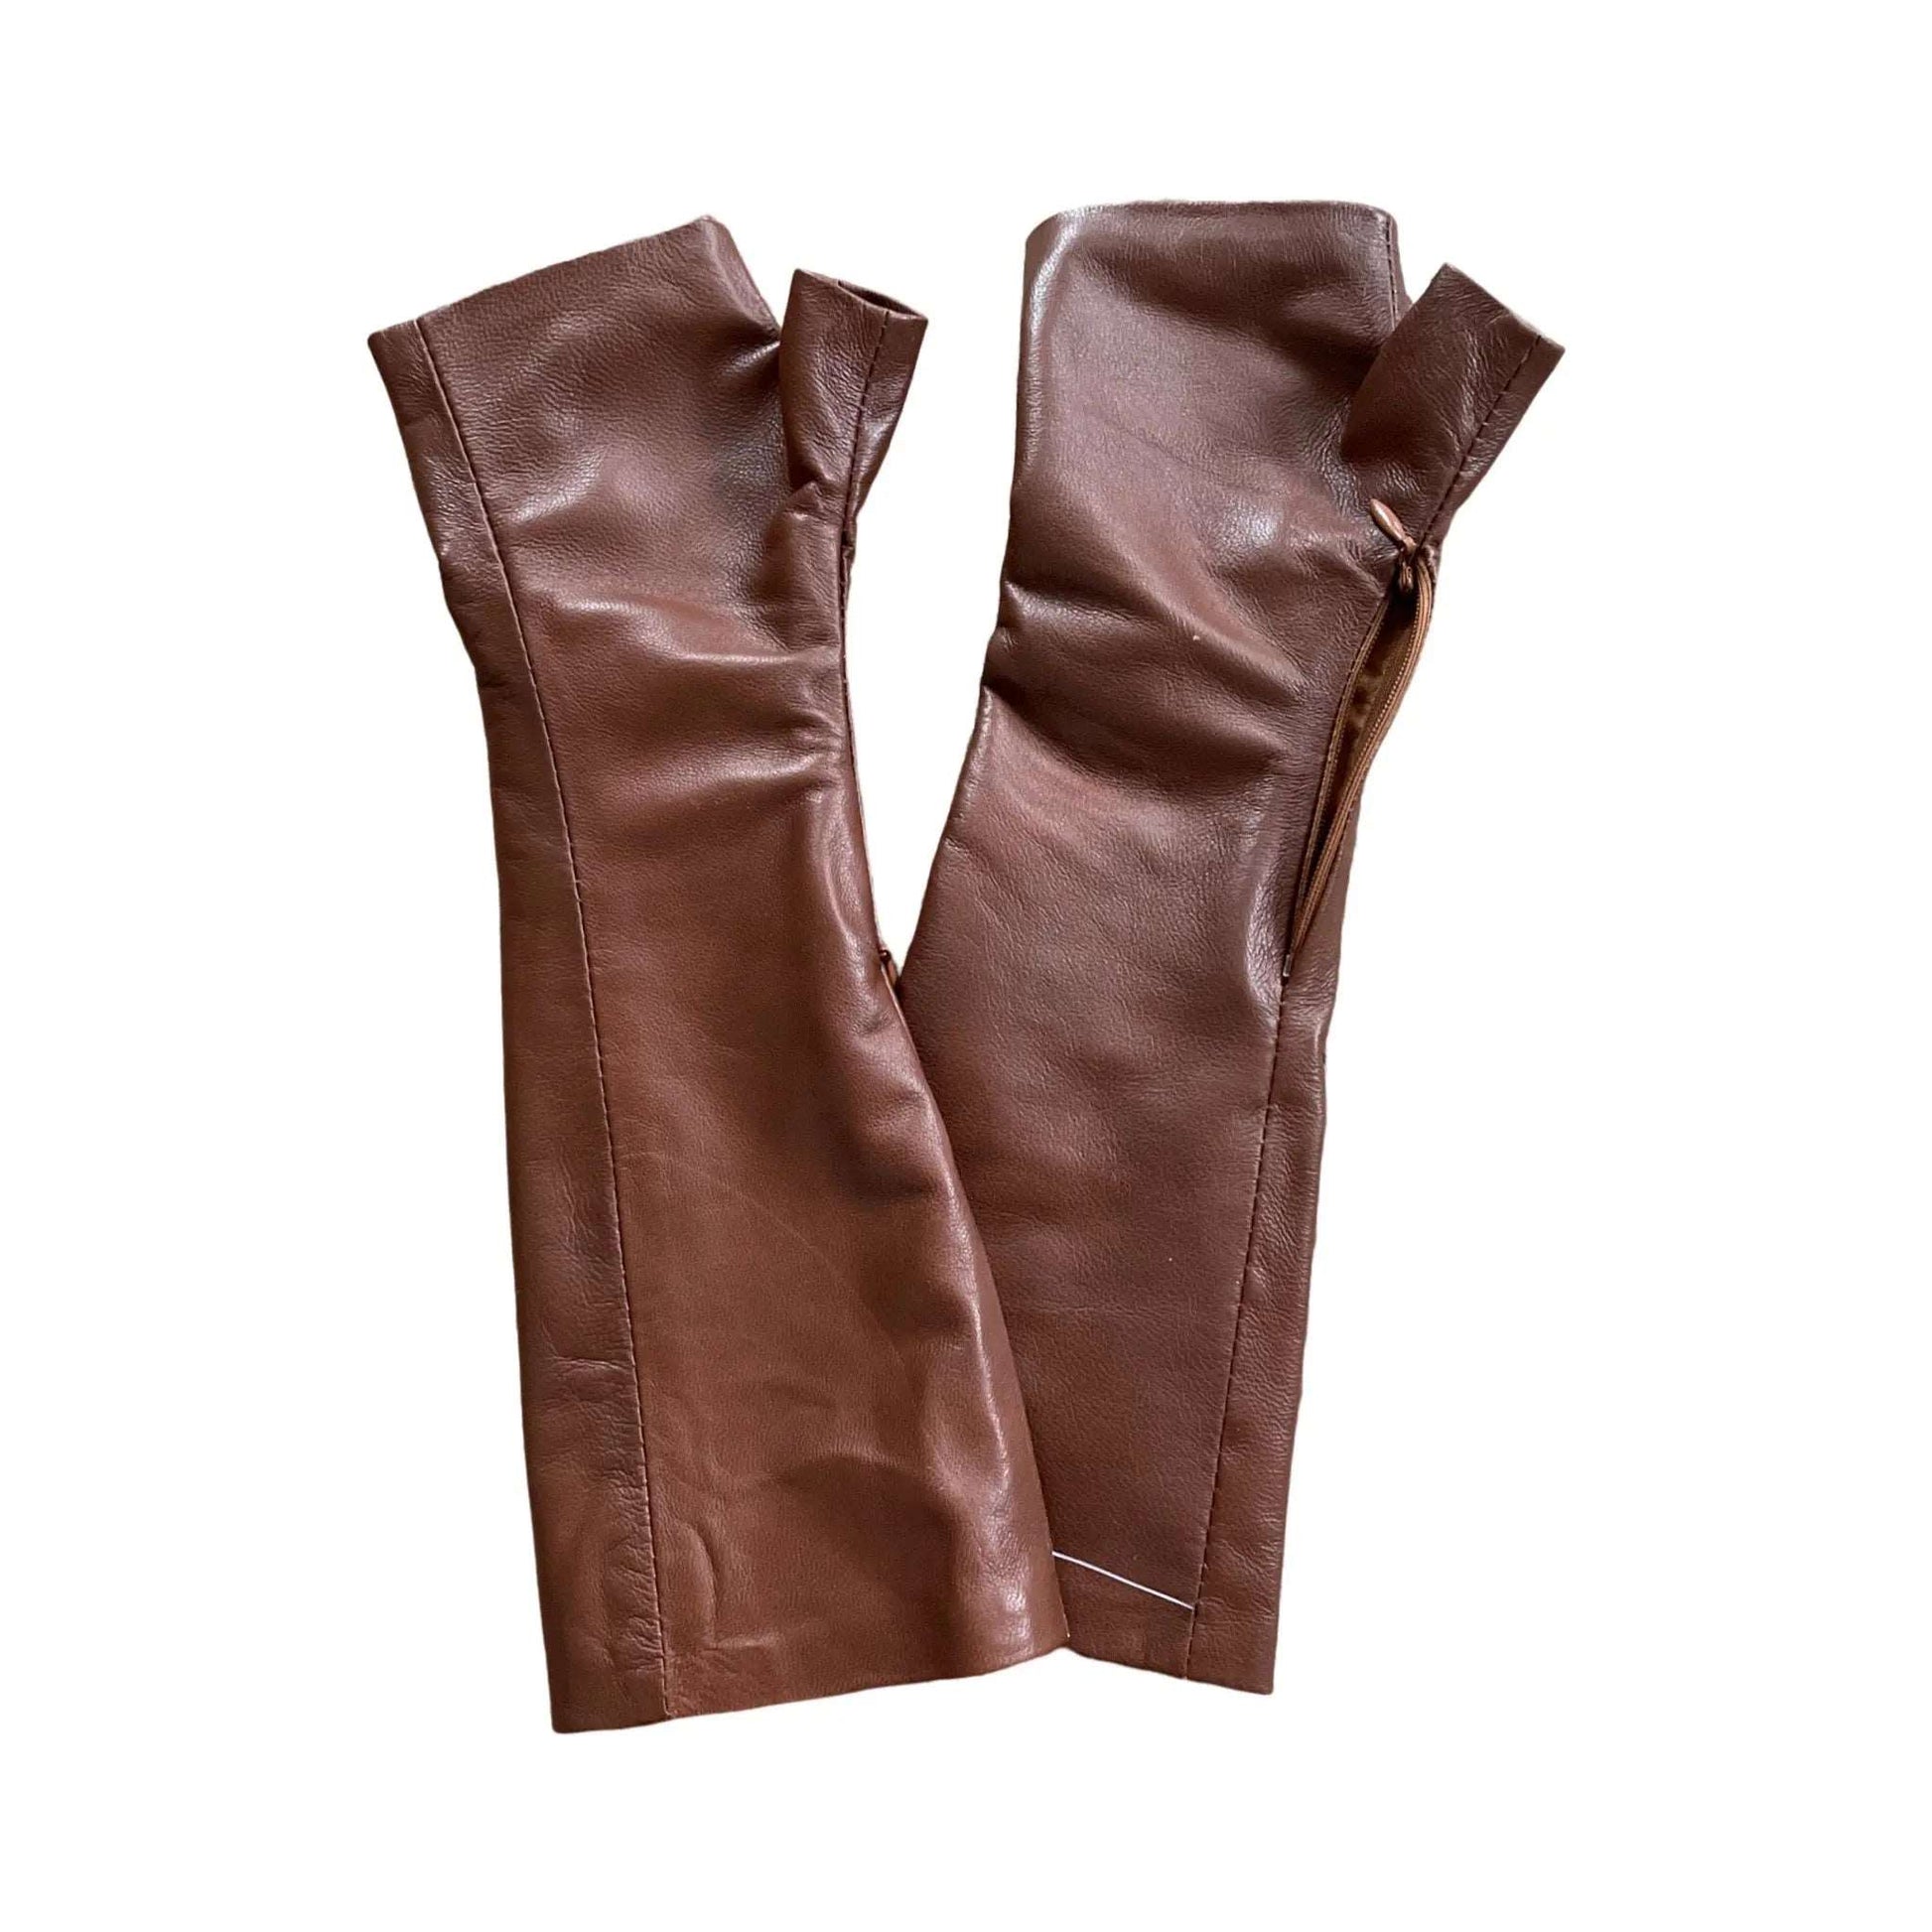 Brown leather Gloves Handmade Accessories